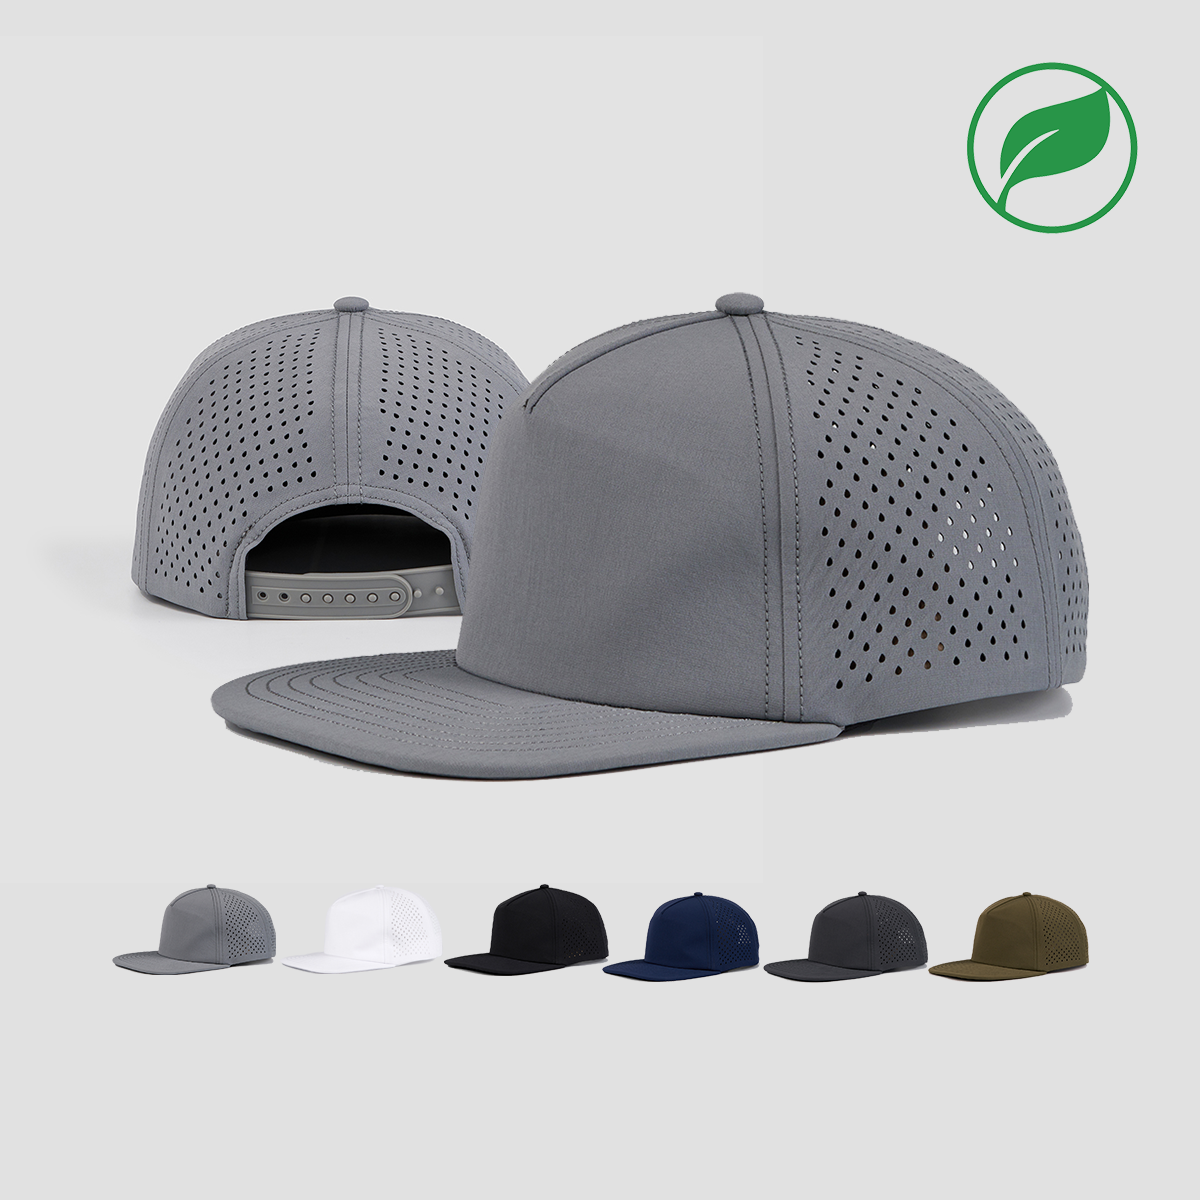 Blank 5 Panel Perforated Performance Snapback Hat Wholesale - 5015 ( UV Protection )